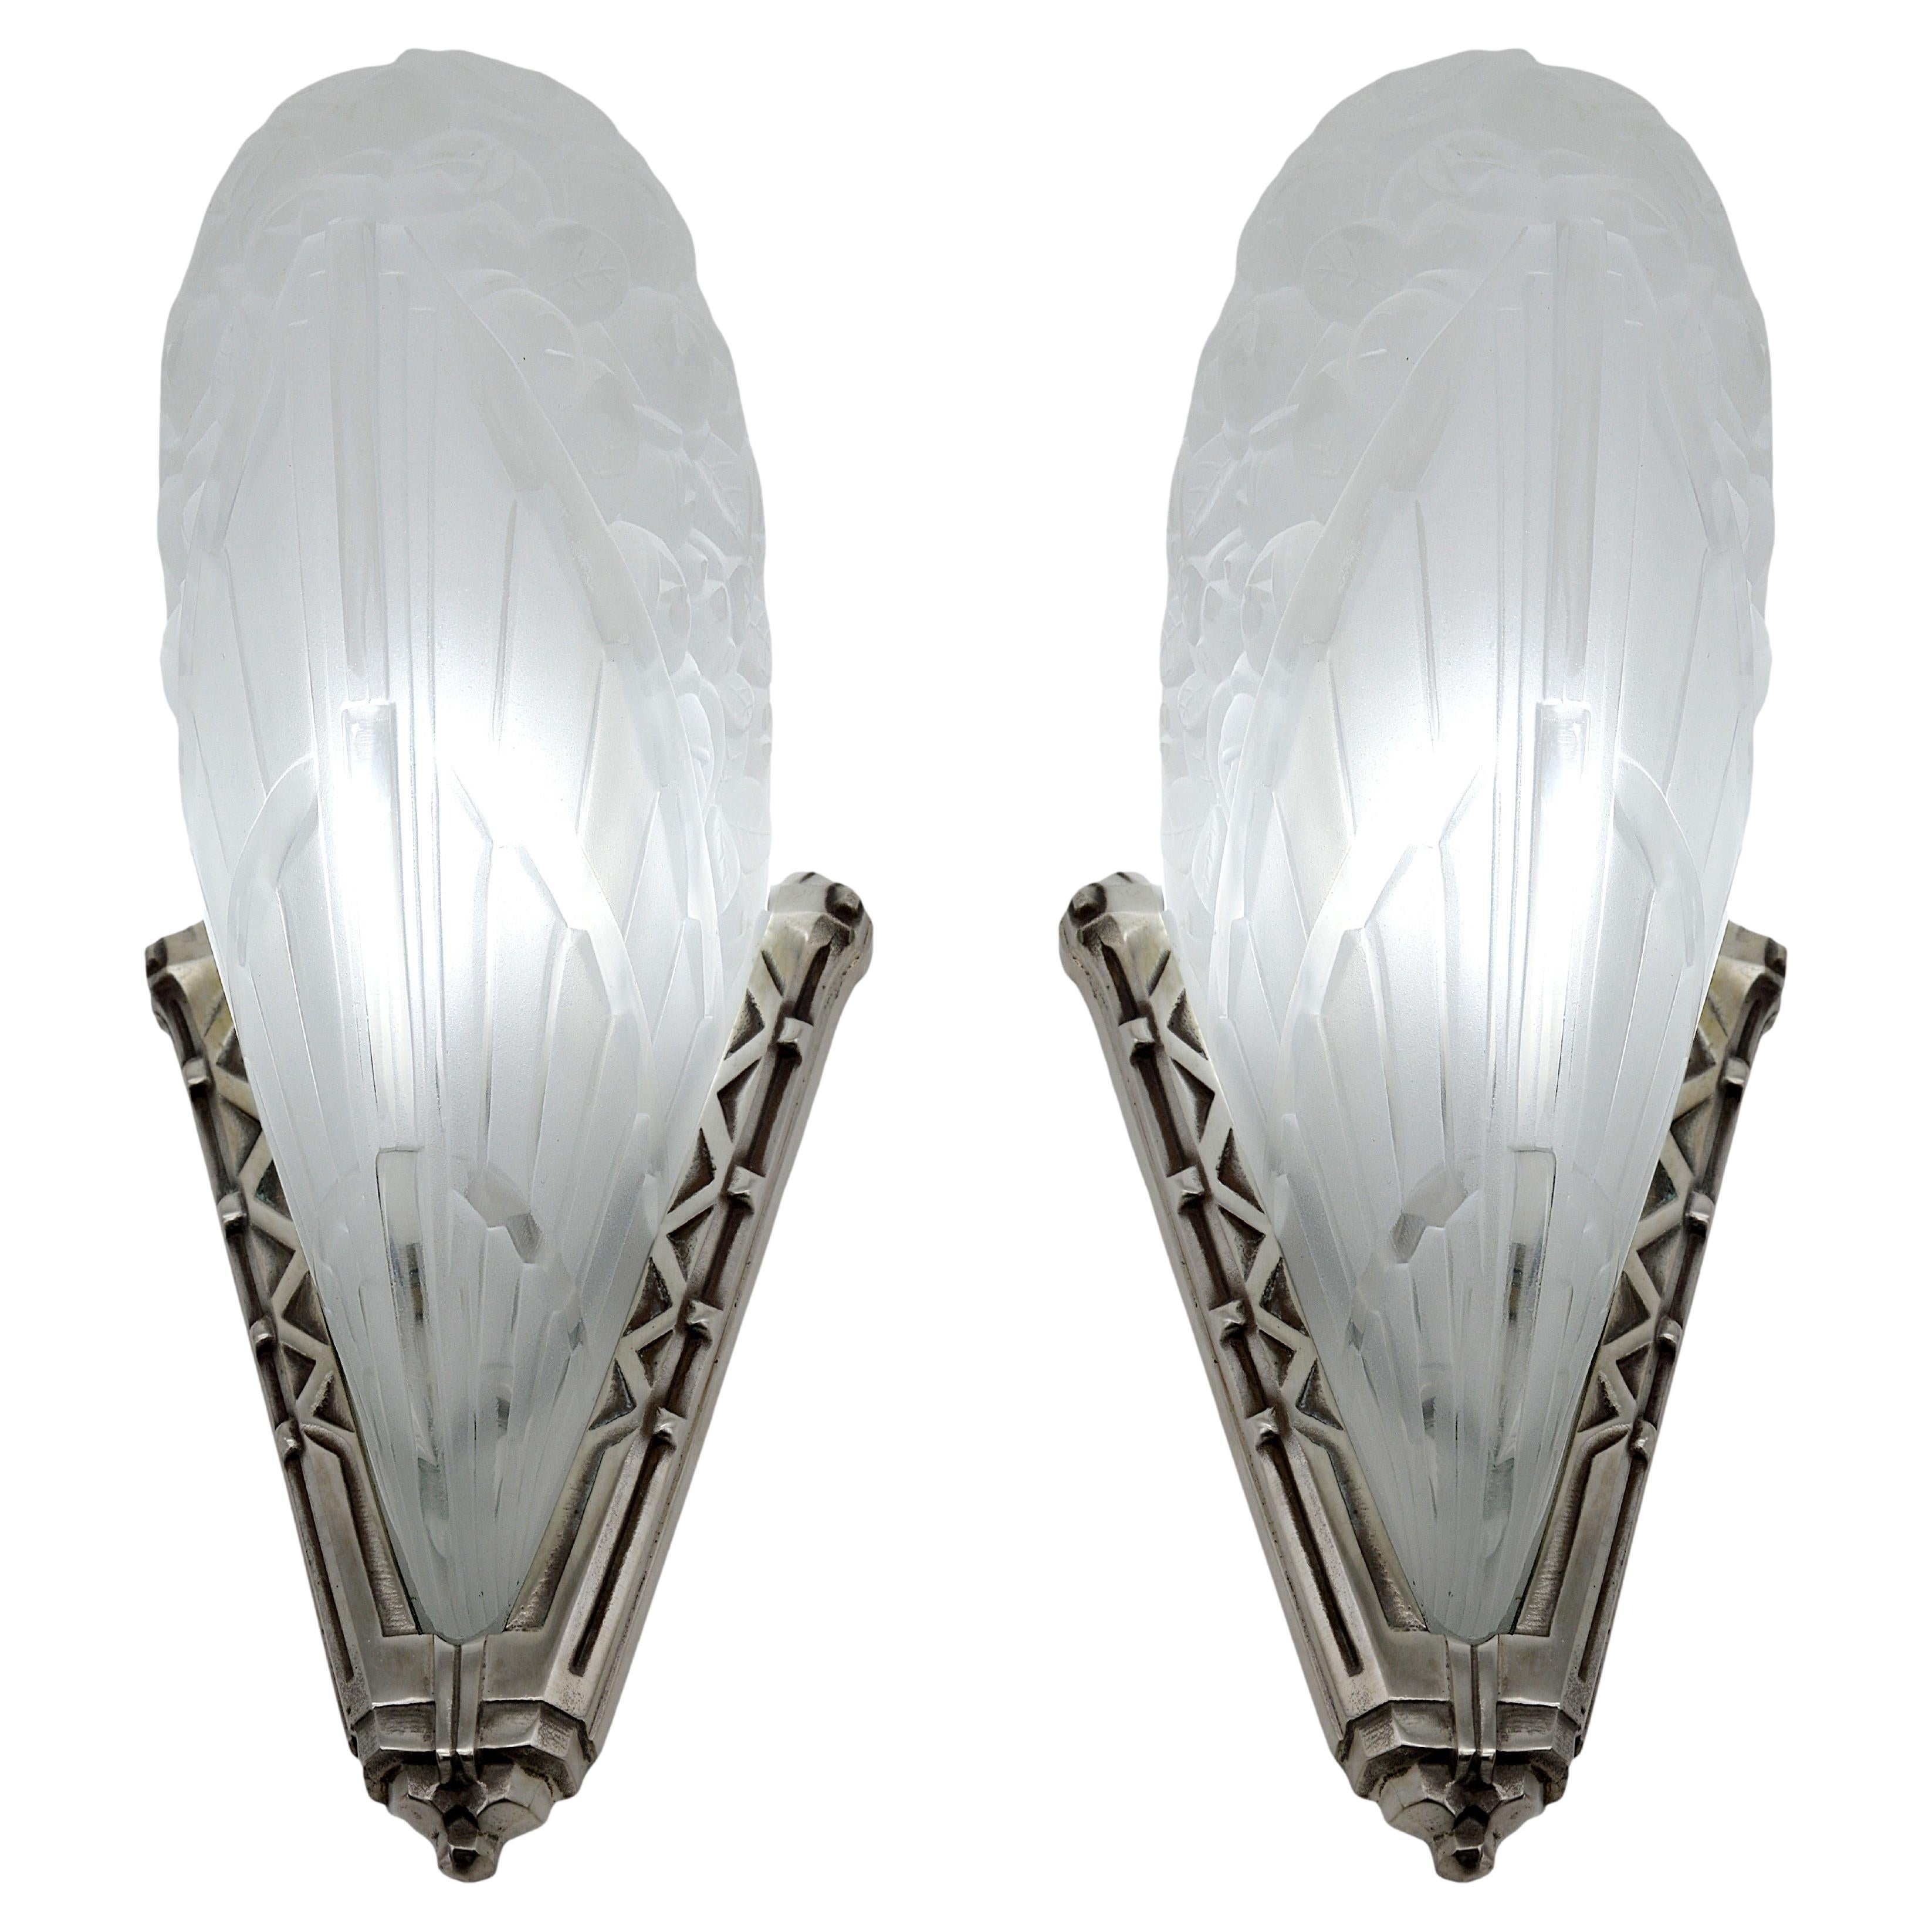 Jean Gauthier French Art Deco Pair of Wall Sconces, 1920s For Sale